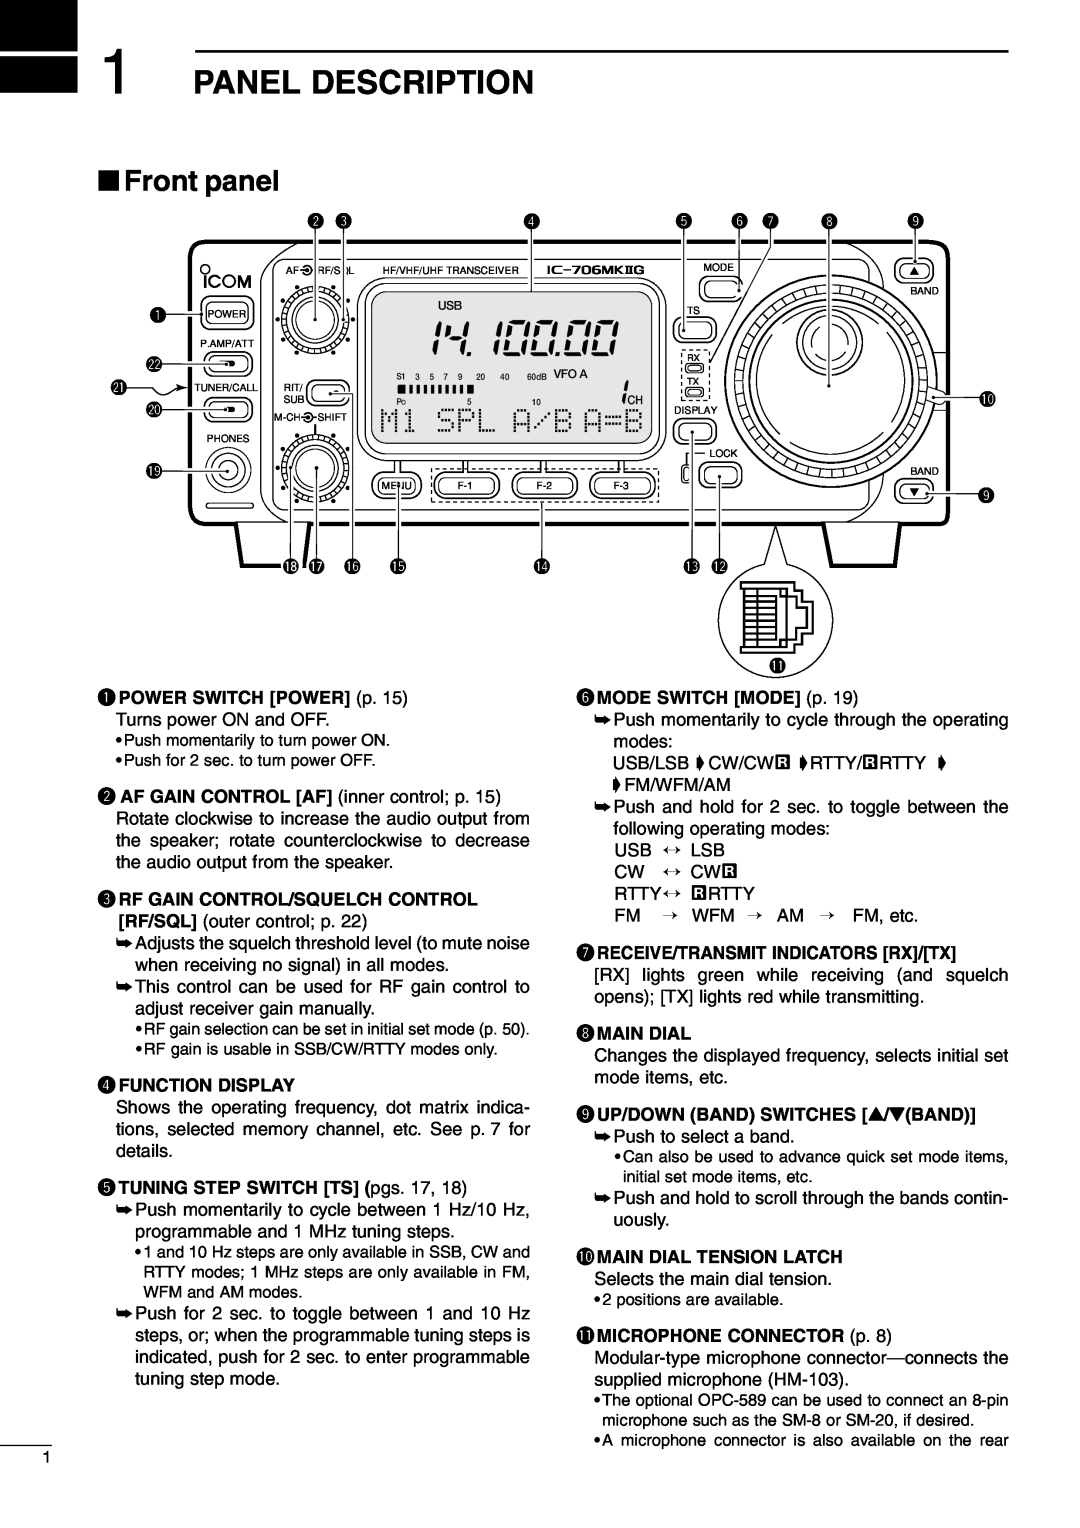 Icom IC-706MKIIG Panel Description, Front panel, q POWER SWITCH POWER p, r FUNCTION DISPLAY, y MODE SWITCH MODE p 